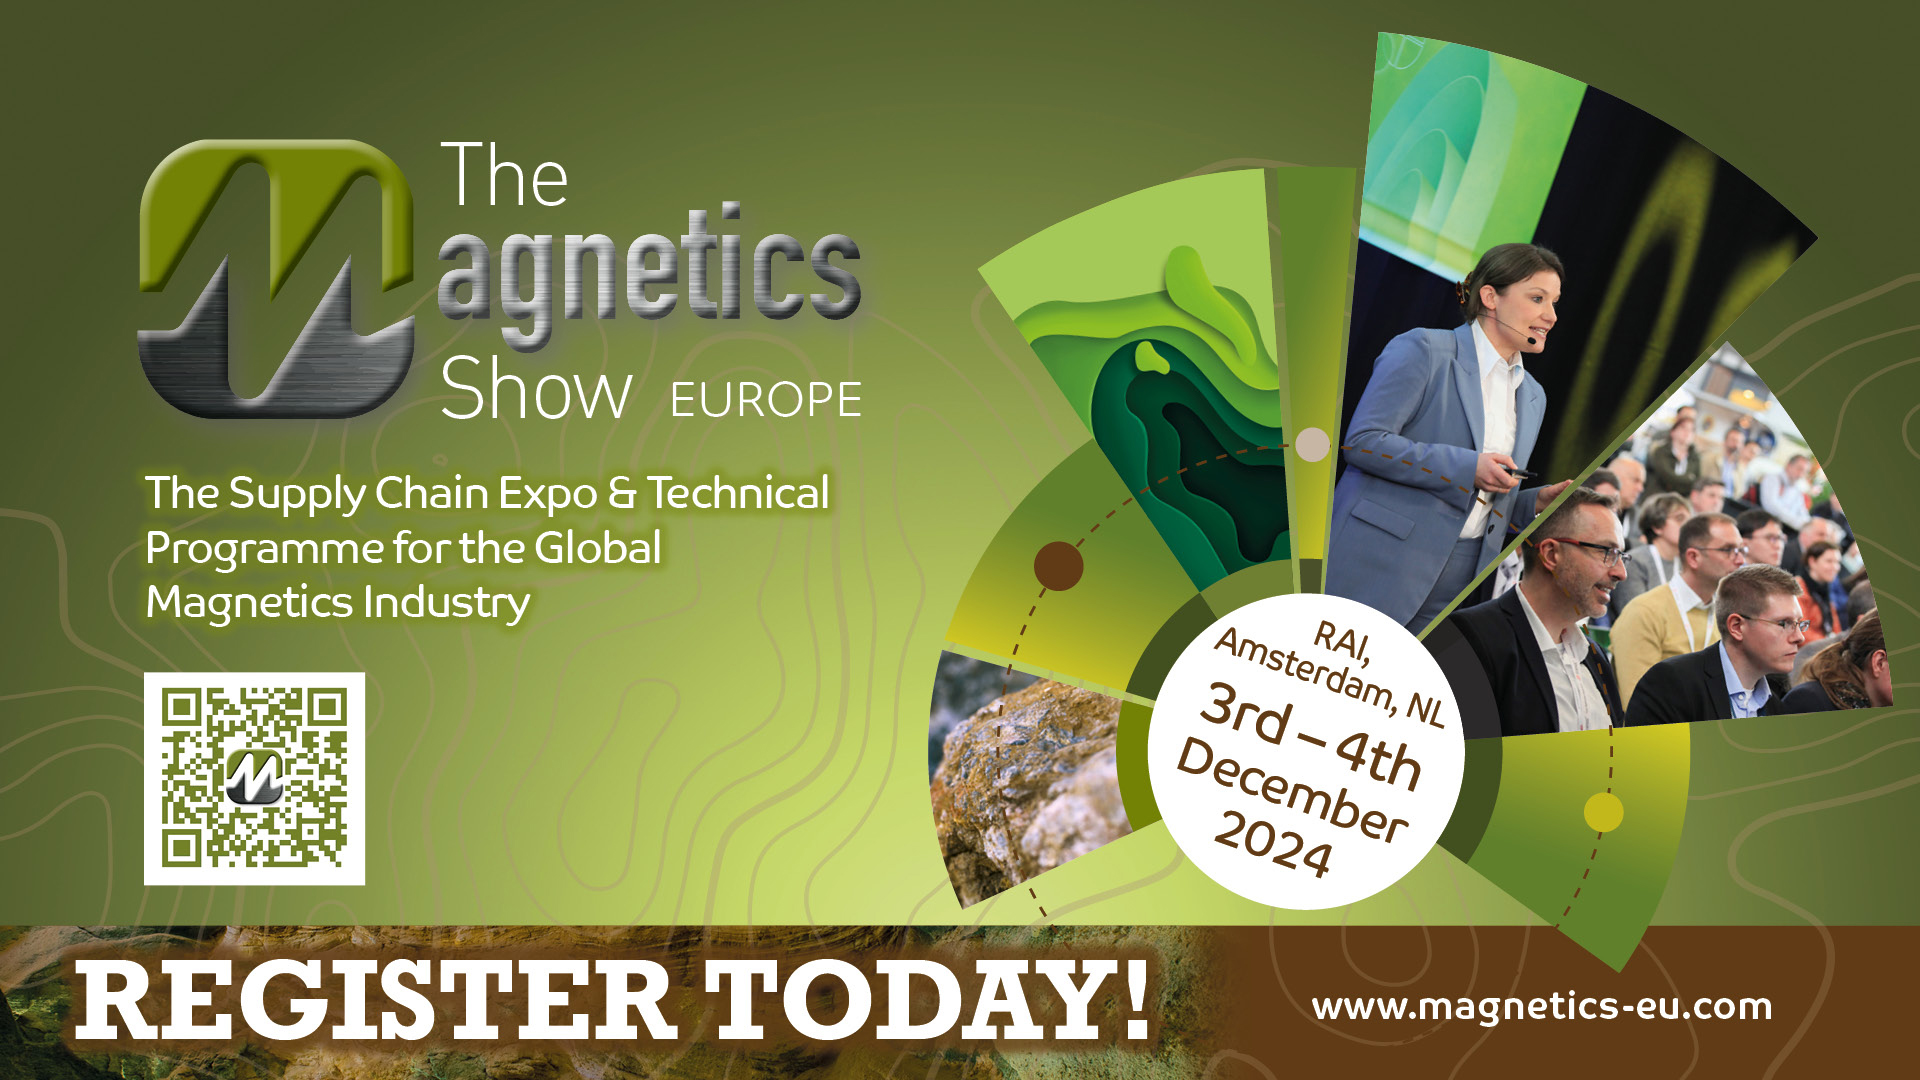 The Supply Chain Expo & Technical Programme for the Global Magnetics Industry